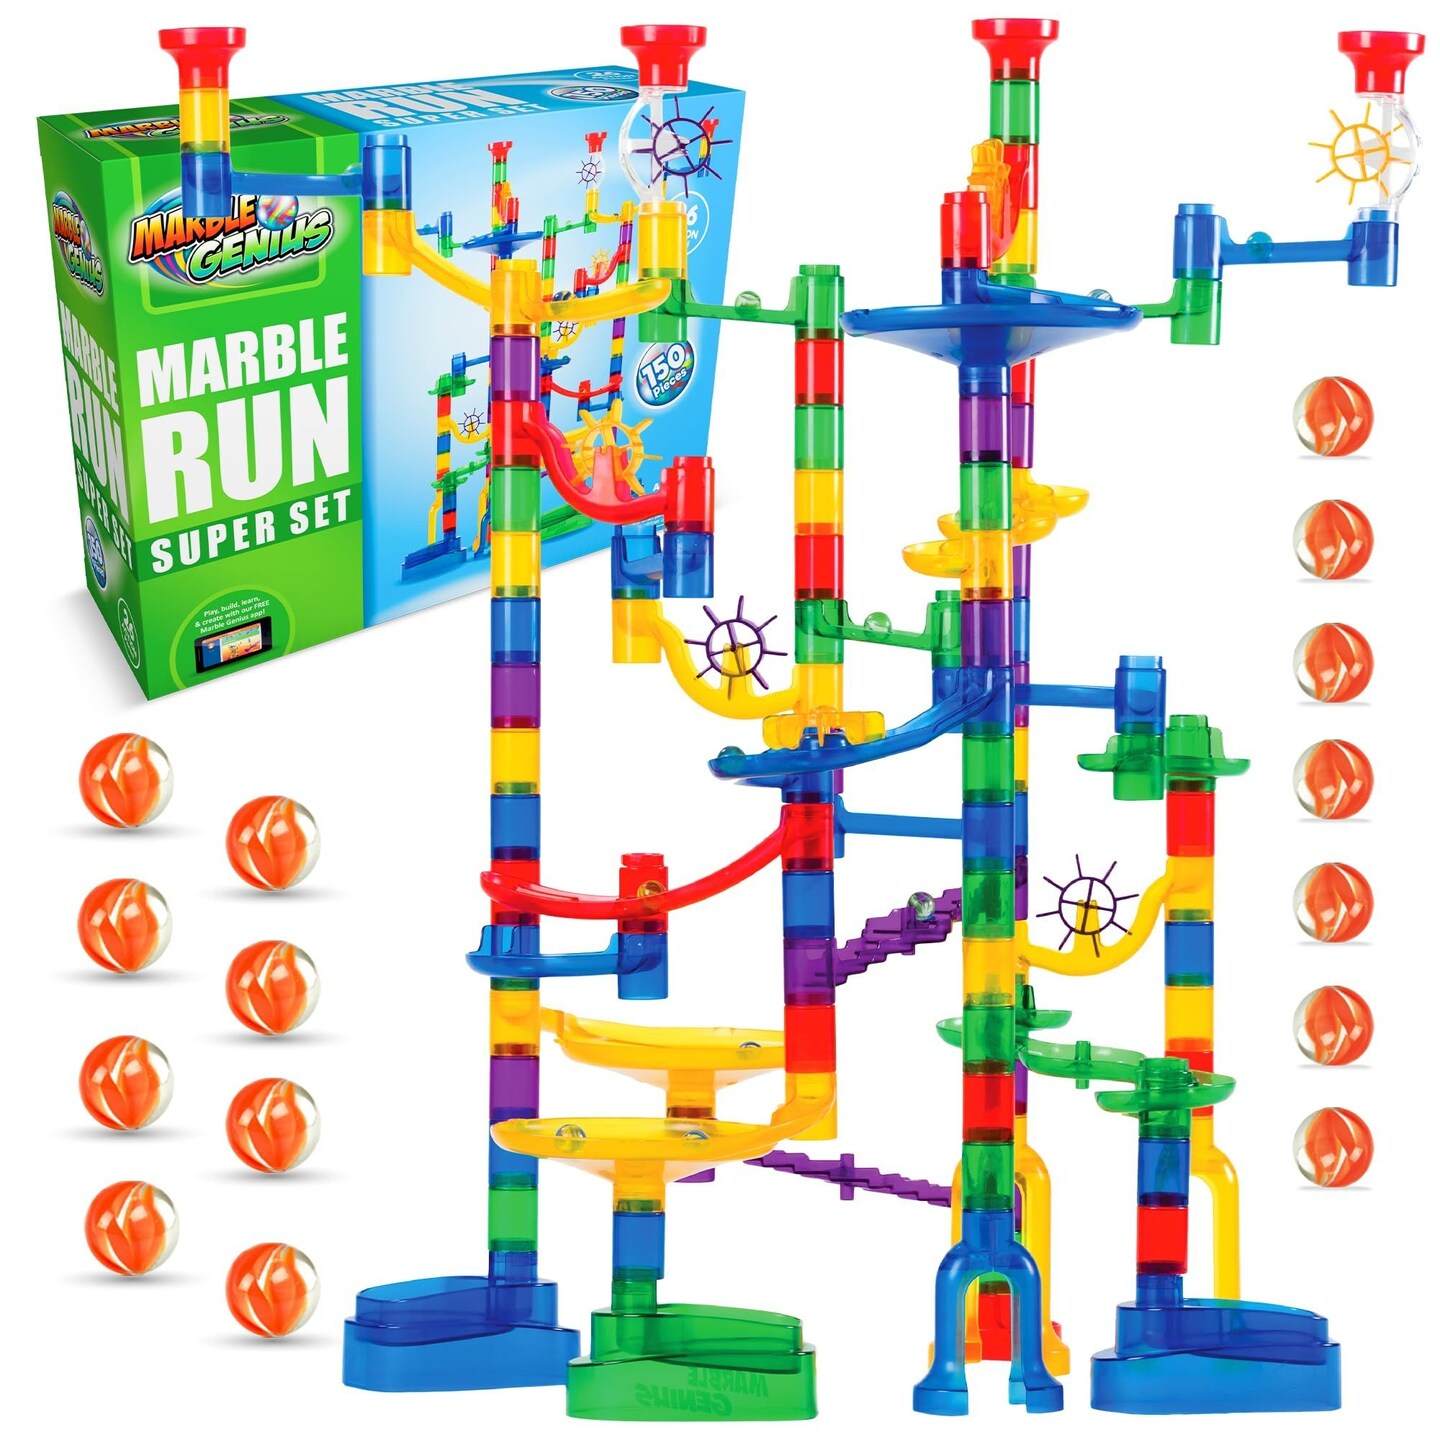 Marble Genius Marble Run - Maze Track Toys for Adults, Teens, Toddlers, or Kids Aged 4-8 Years Old, 150 Complete Pieces (85 Translucent Marbulous Pieces + 65 Glass-Marble Set), Super Set